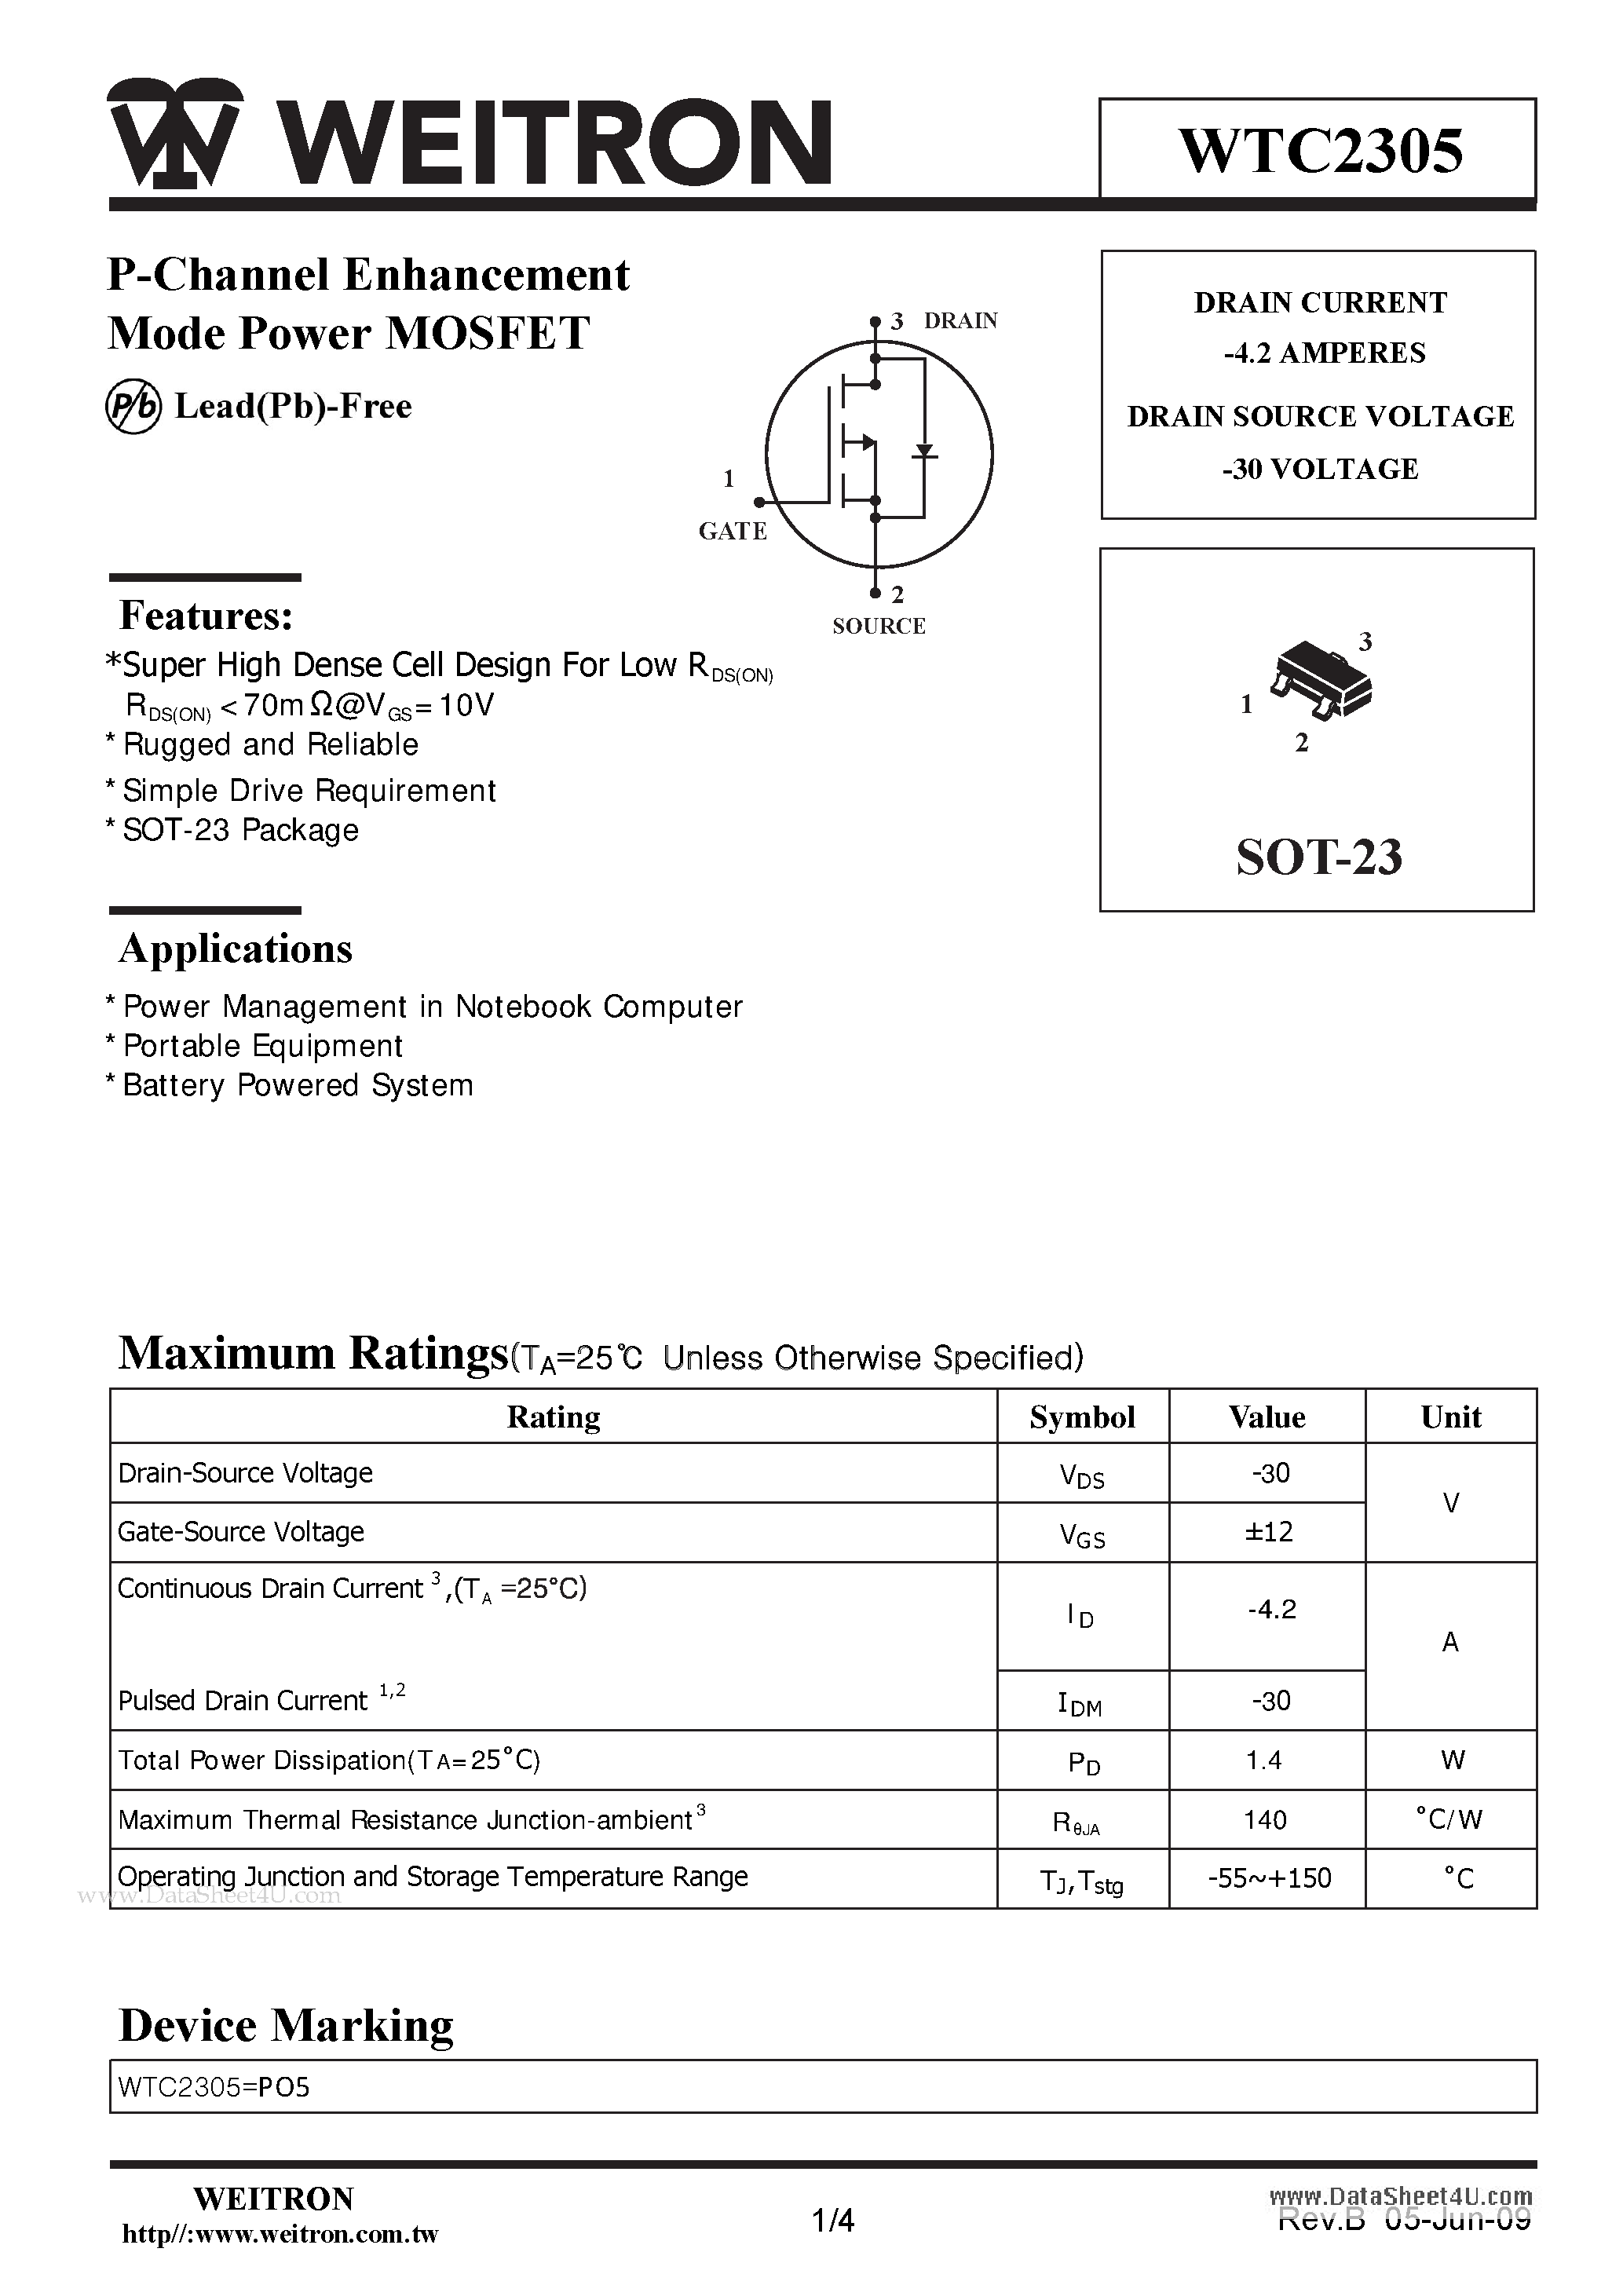 Datasheet WTC2305 - P-Channel Enhancement Mode Power MOSFET page 1